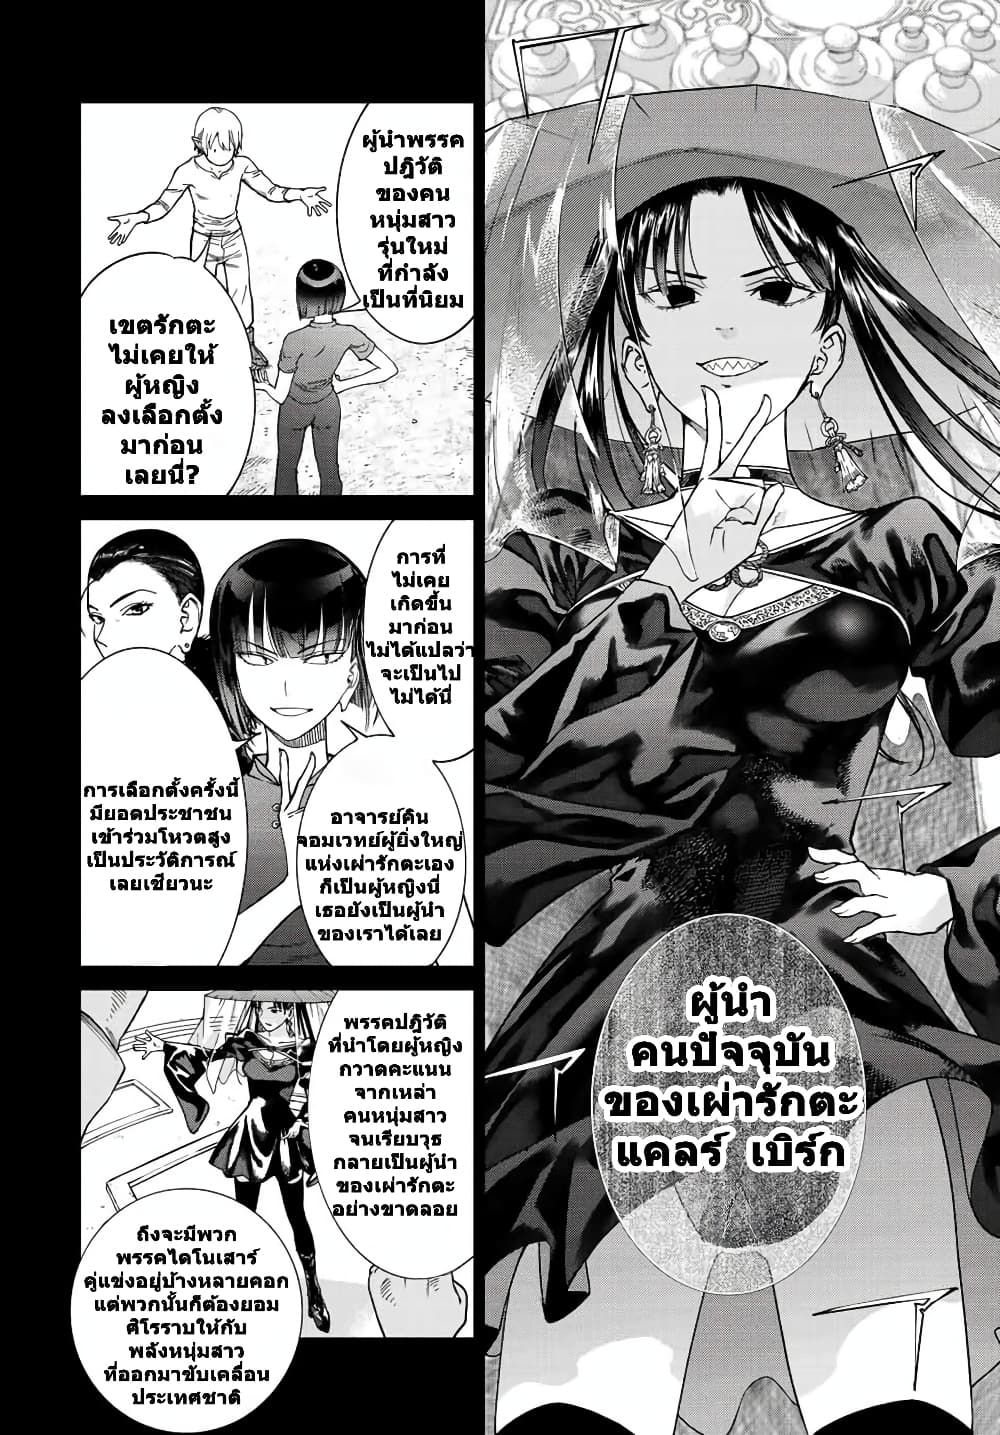 Magus of the Library ตอนที่ 39.2 (12)